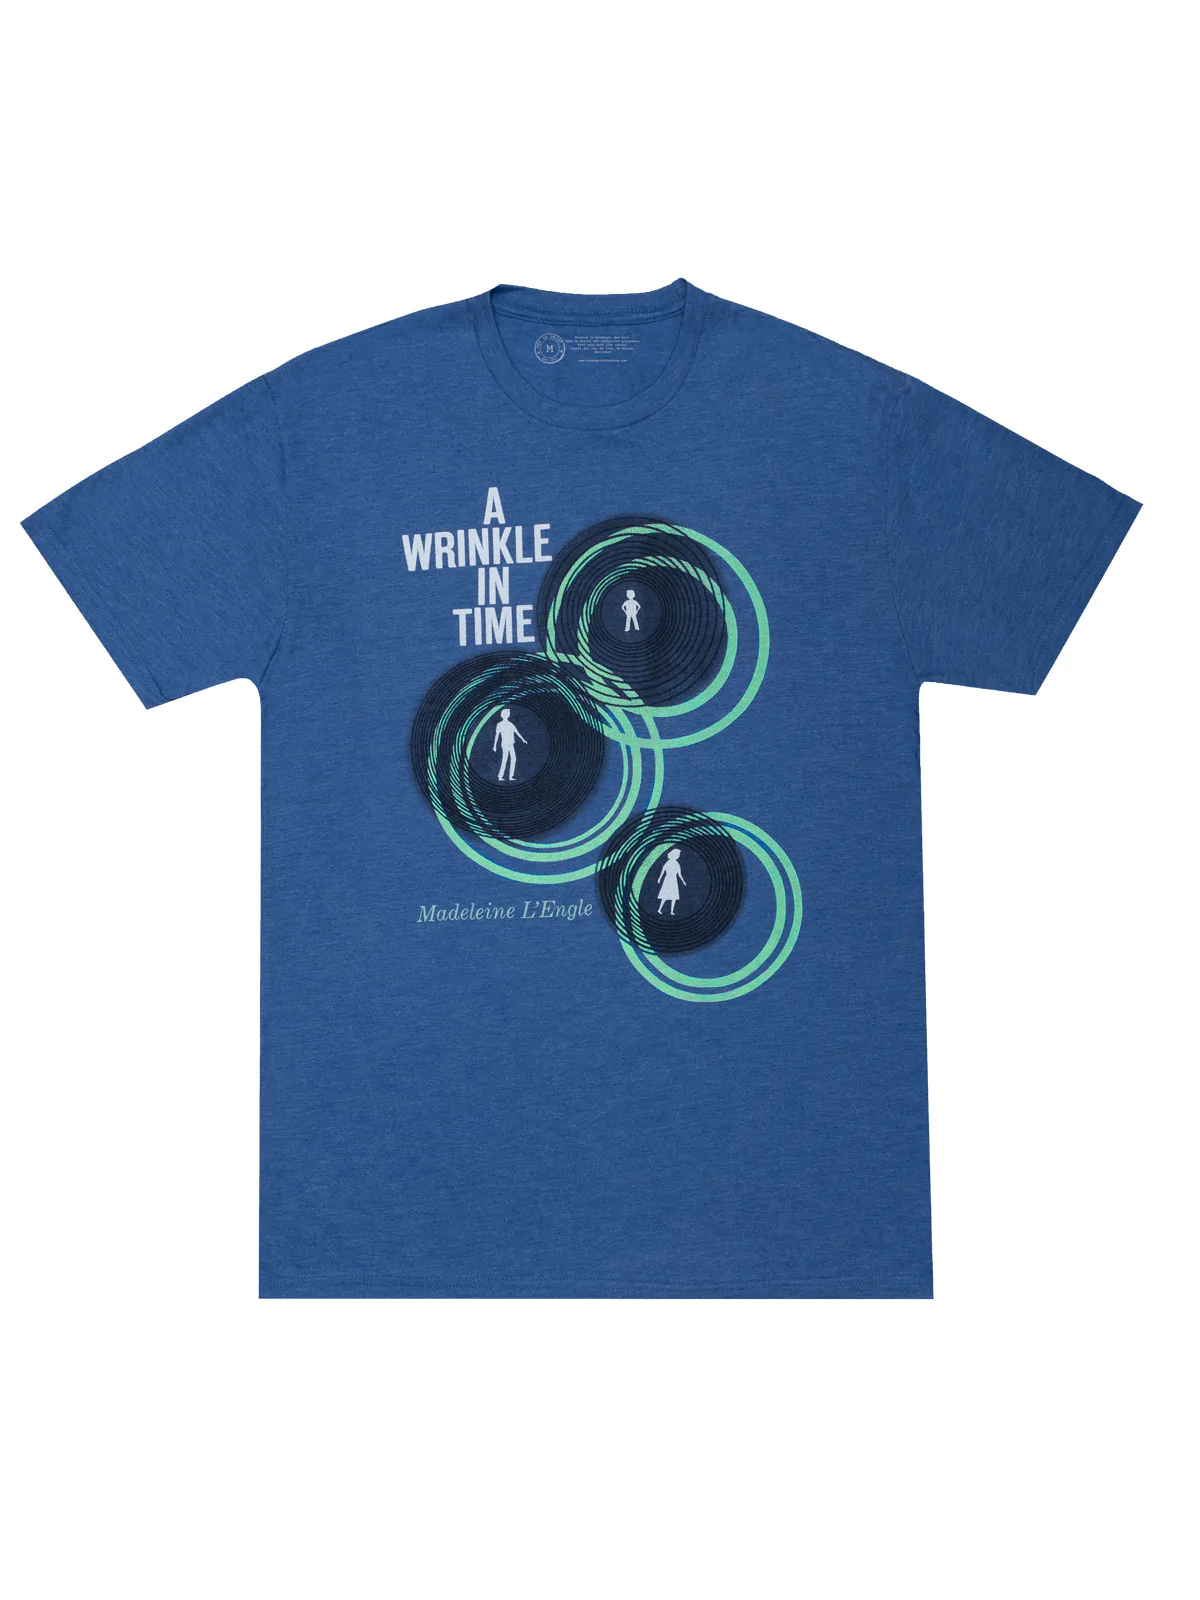 A Wrinkle In Time T-Shirt